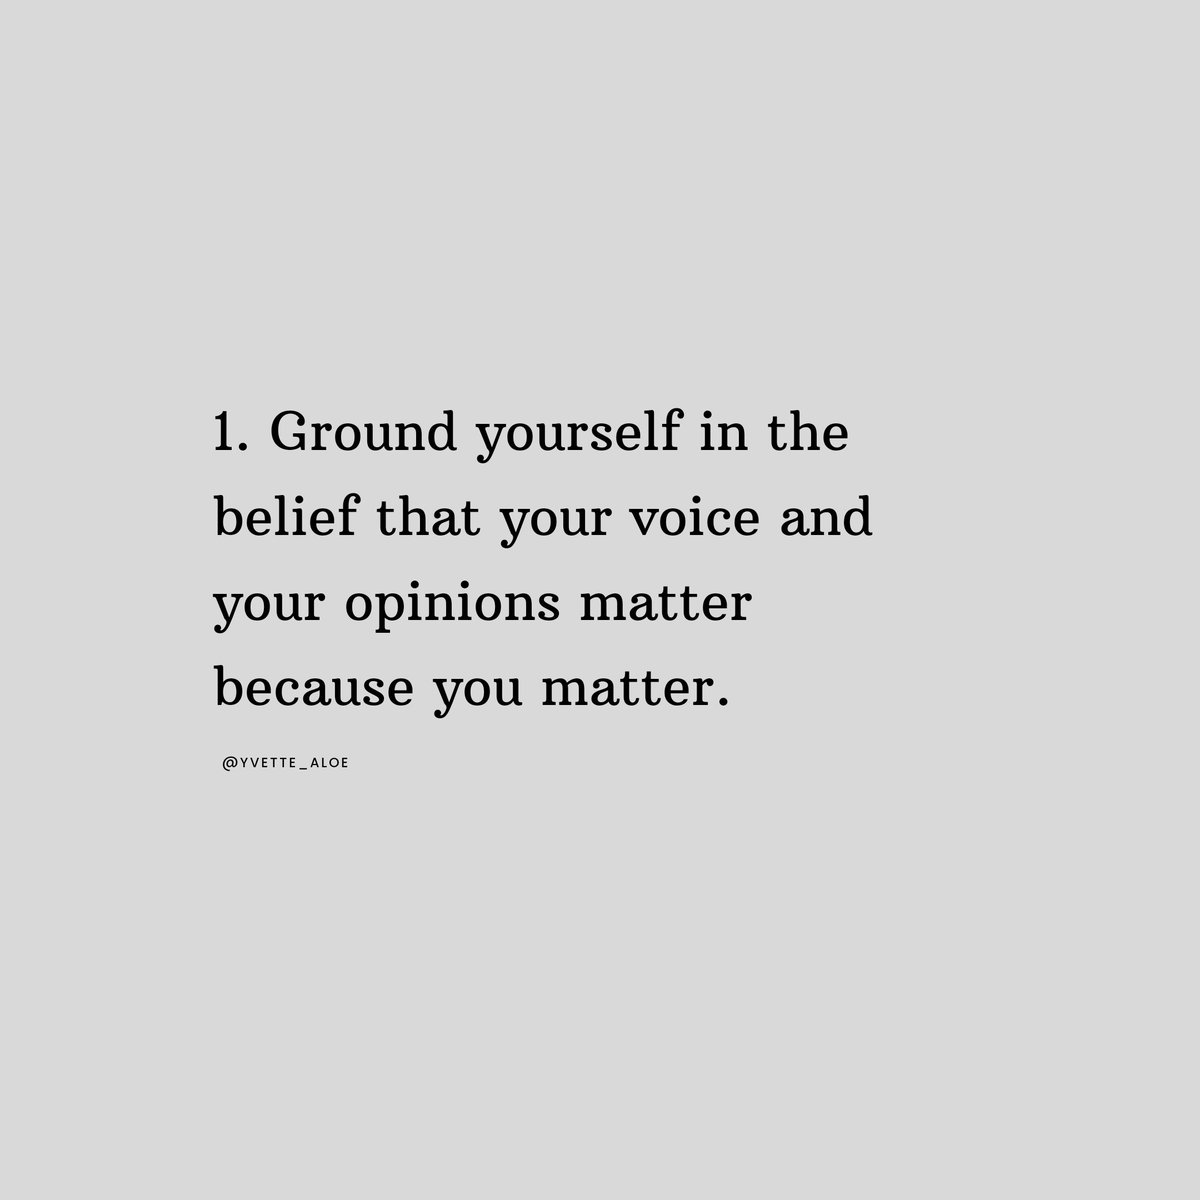 Ground yourself in the belief that your voice and opinions matter because you matter.